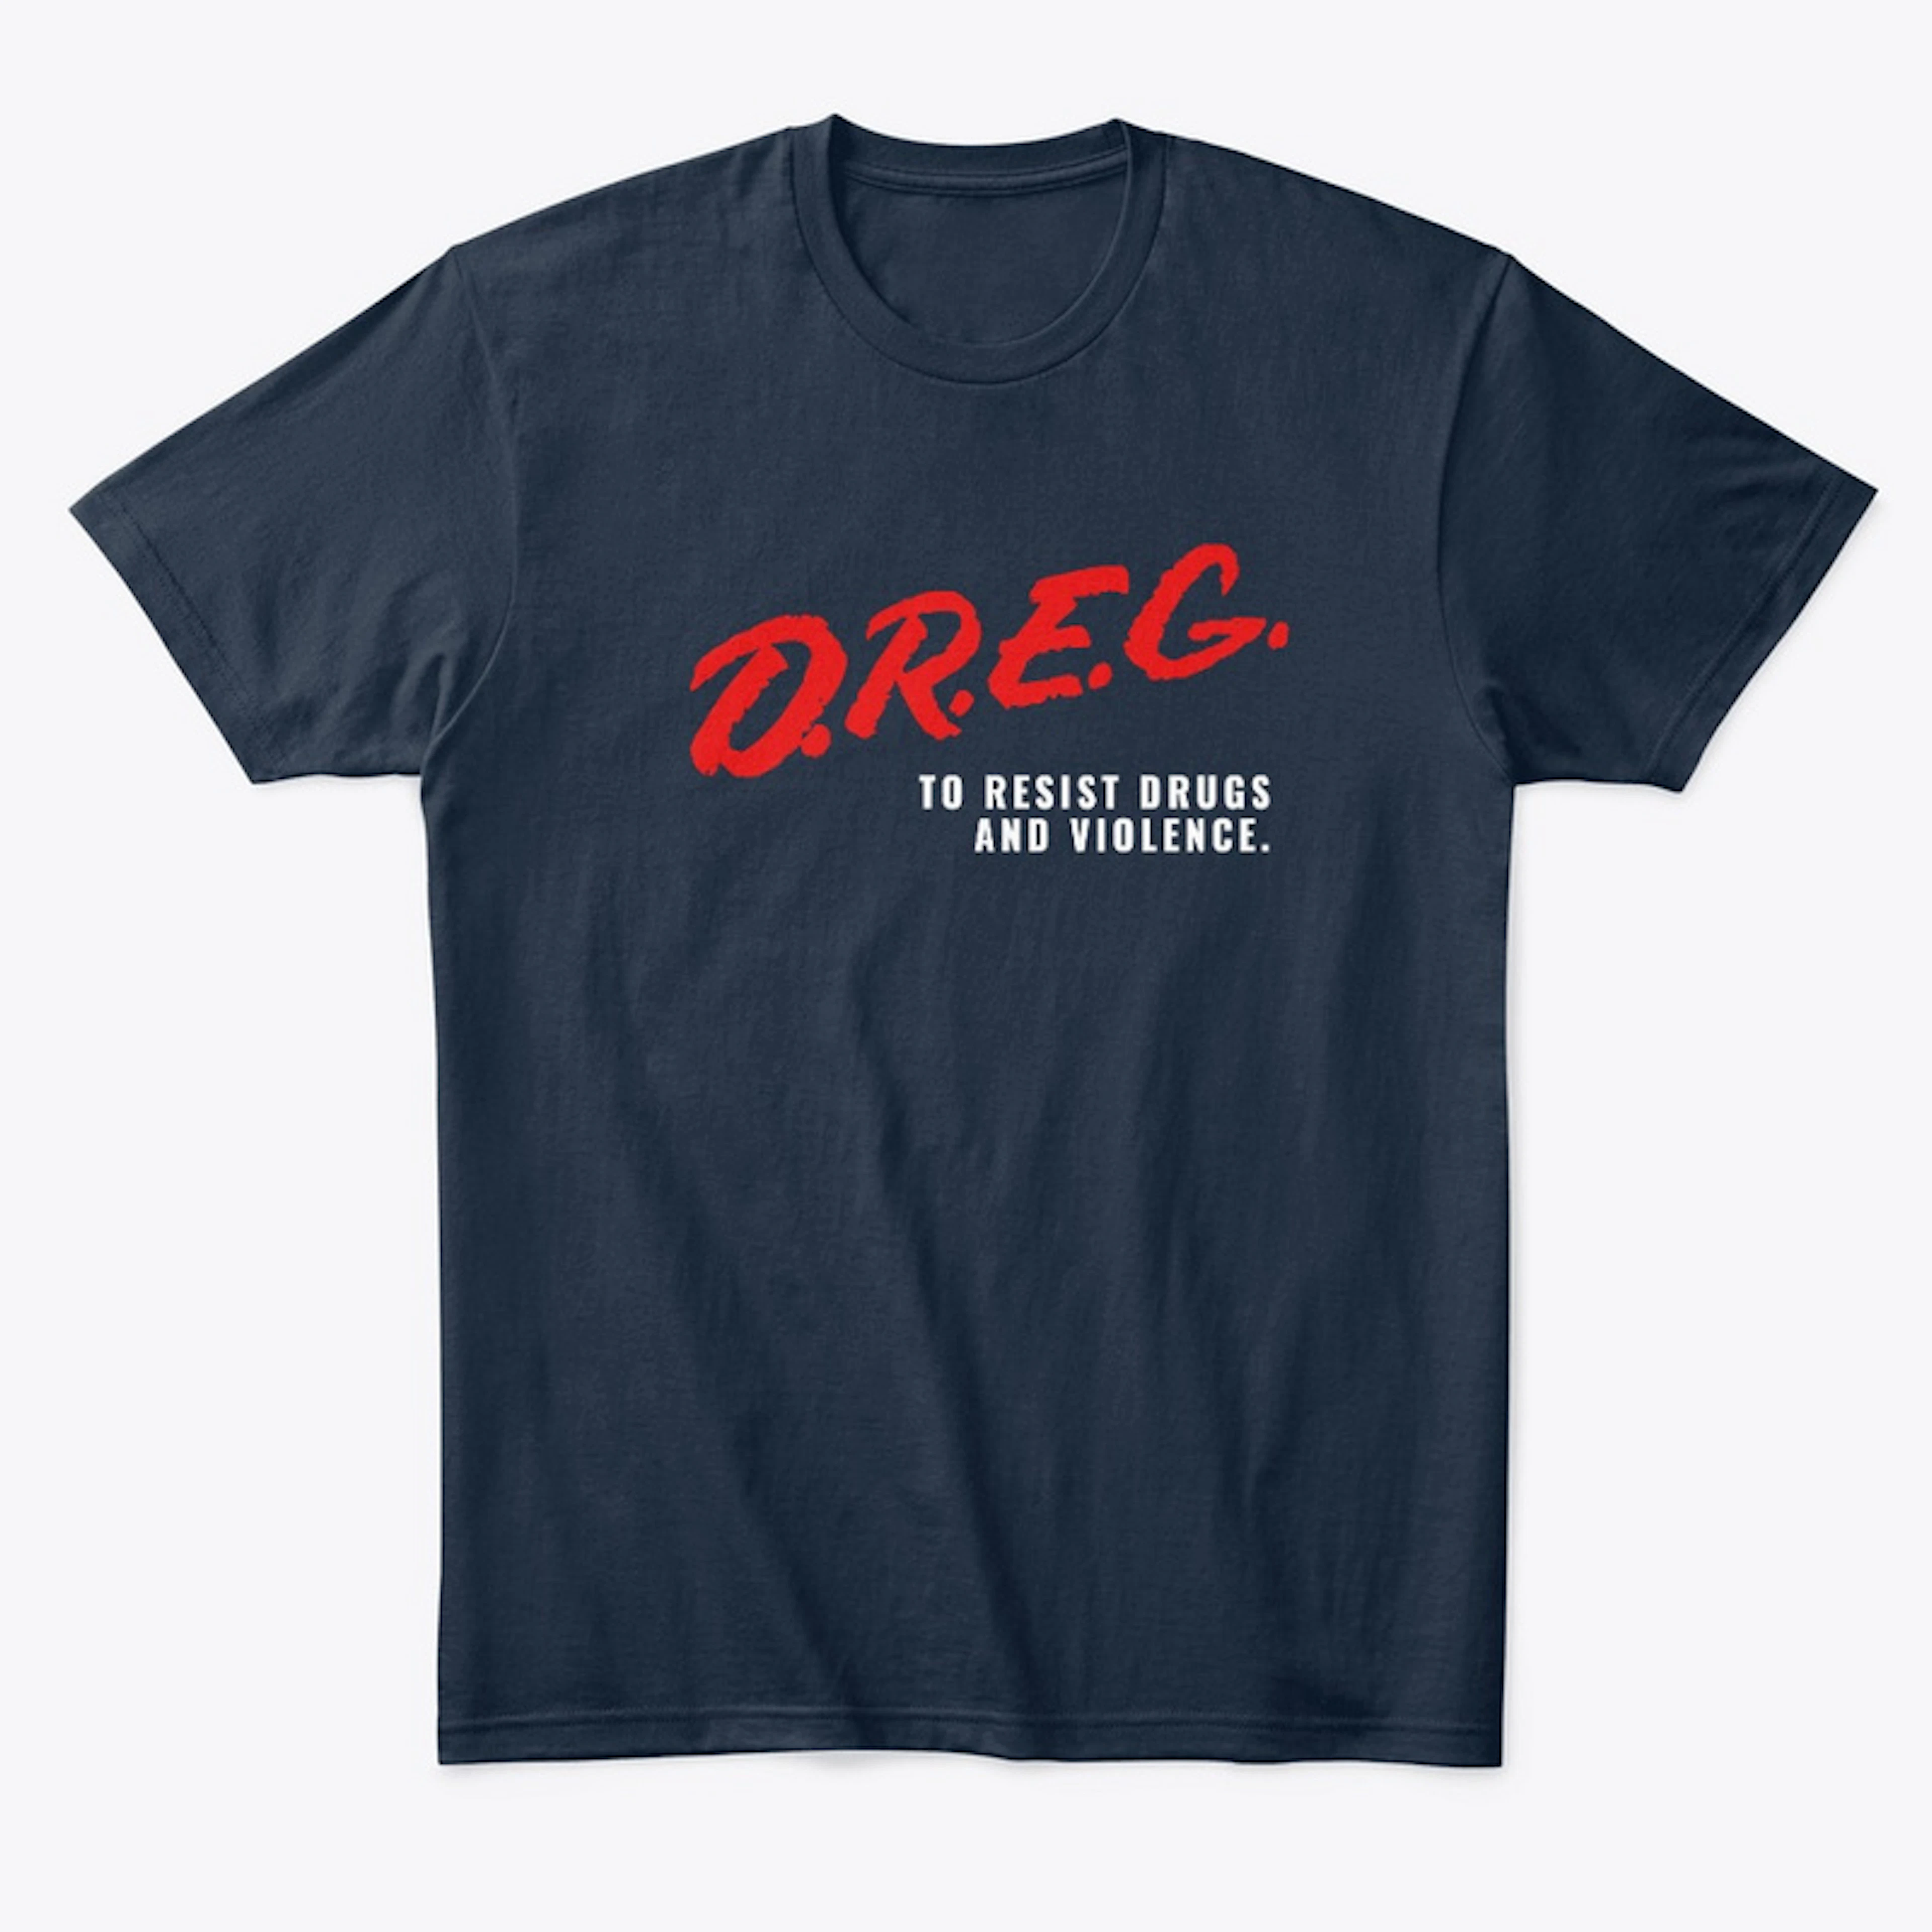 D.R.E.G. TO RESIST DRUGS AND VIOLENCE